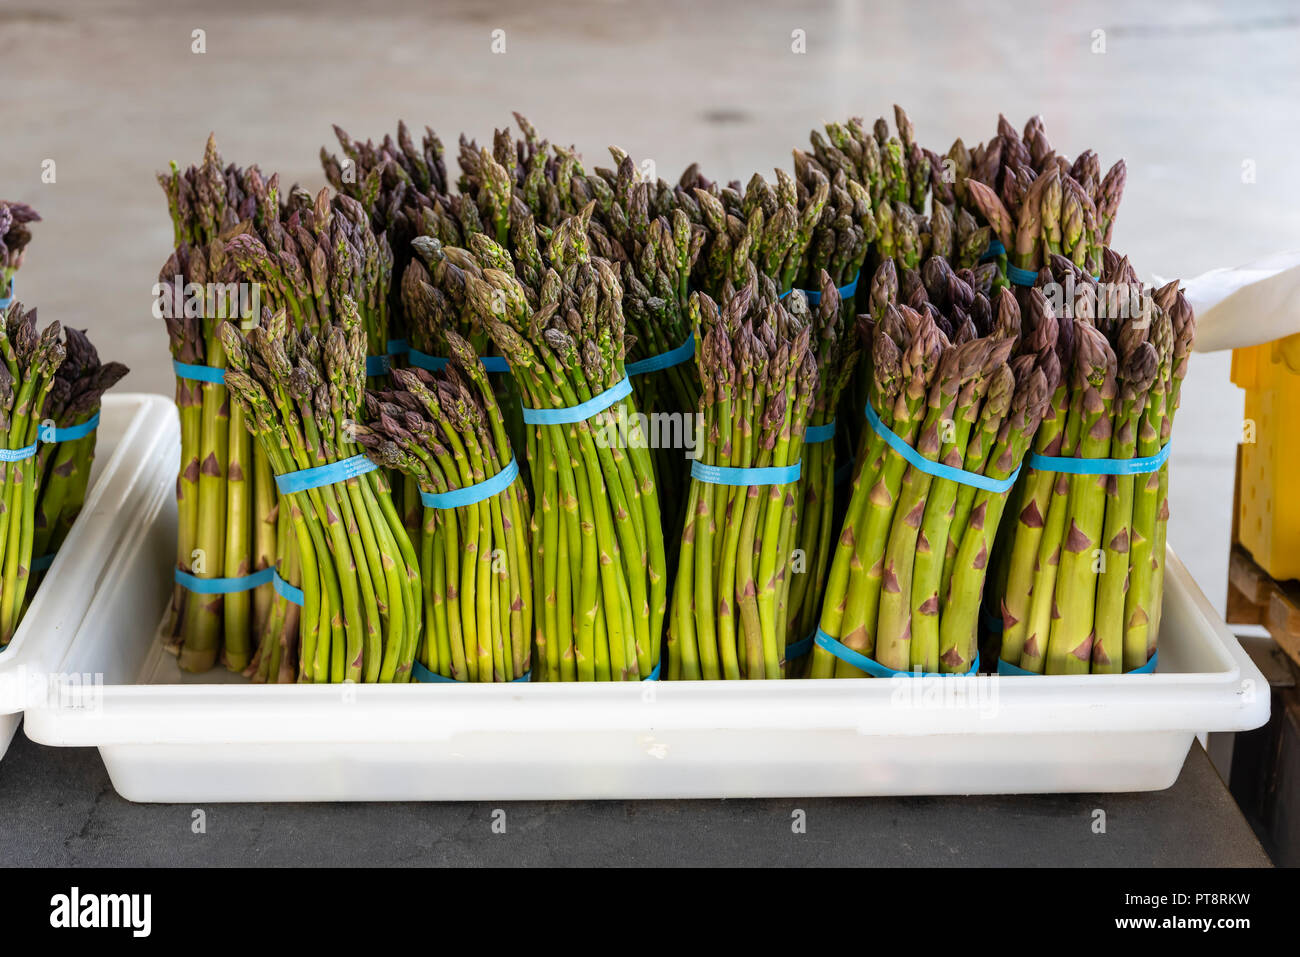 Trays of bunched asparagus for sale at a farm market in Yakima Washington Stock Photo